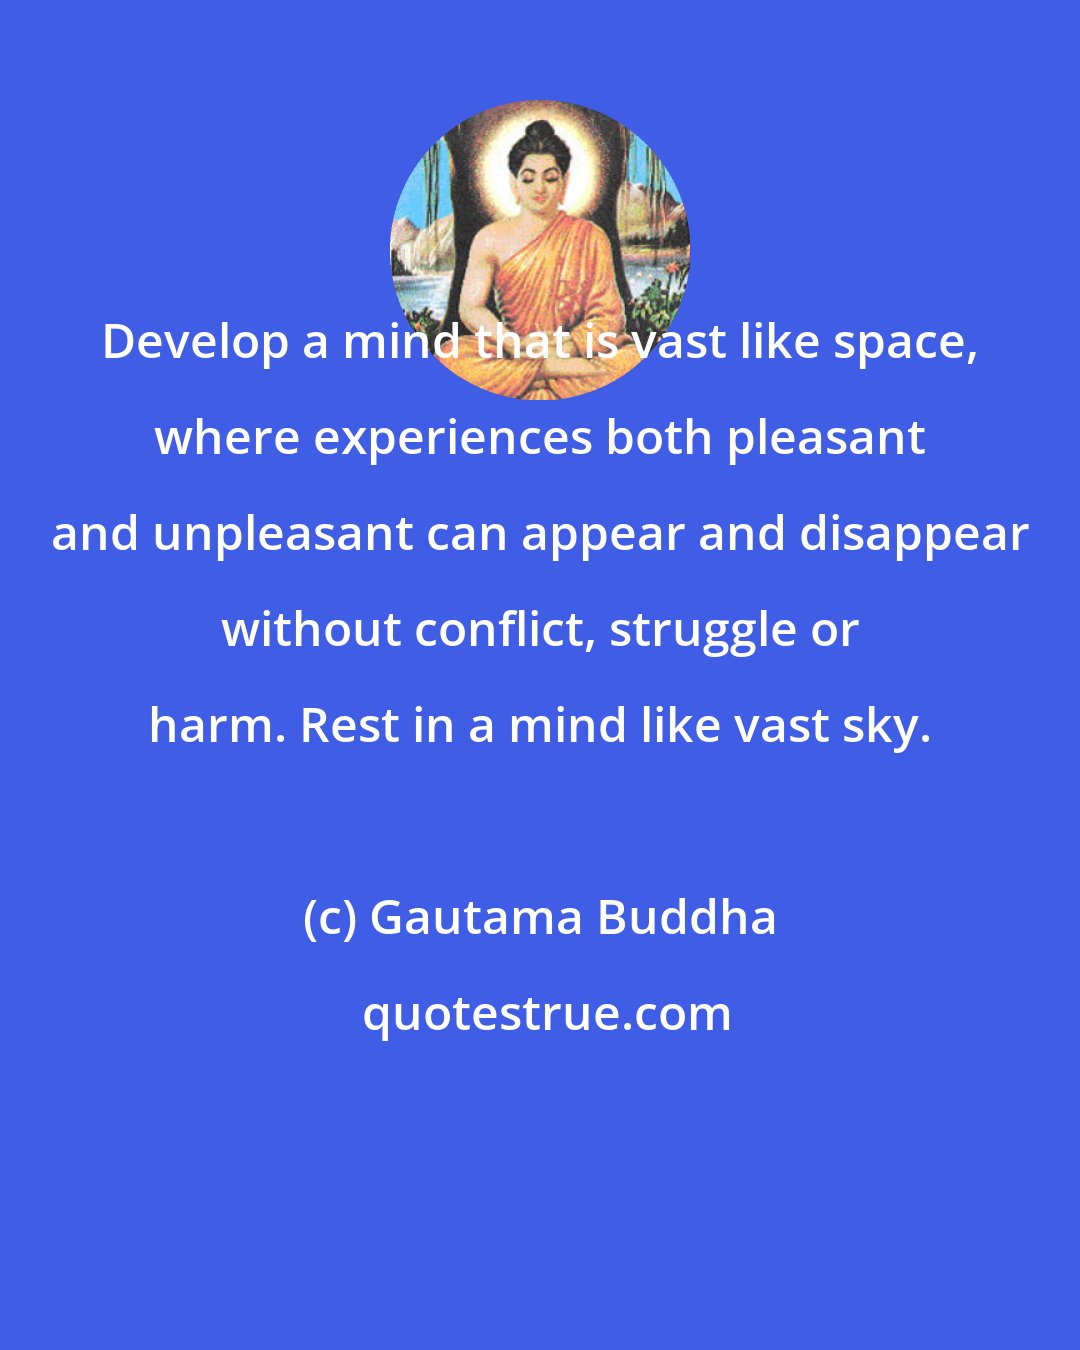 Gautama Buddha: Develop a mind that is vast like space, where experiences both pleasant and unpleasant can appear and disappear without conflict, struggle or harm. Rest in a mind like vast sky.